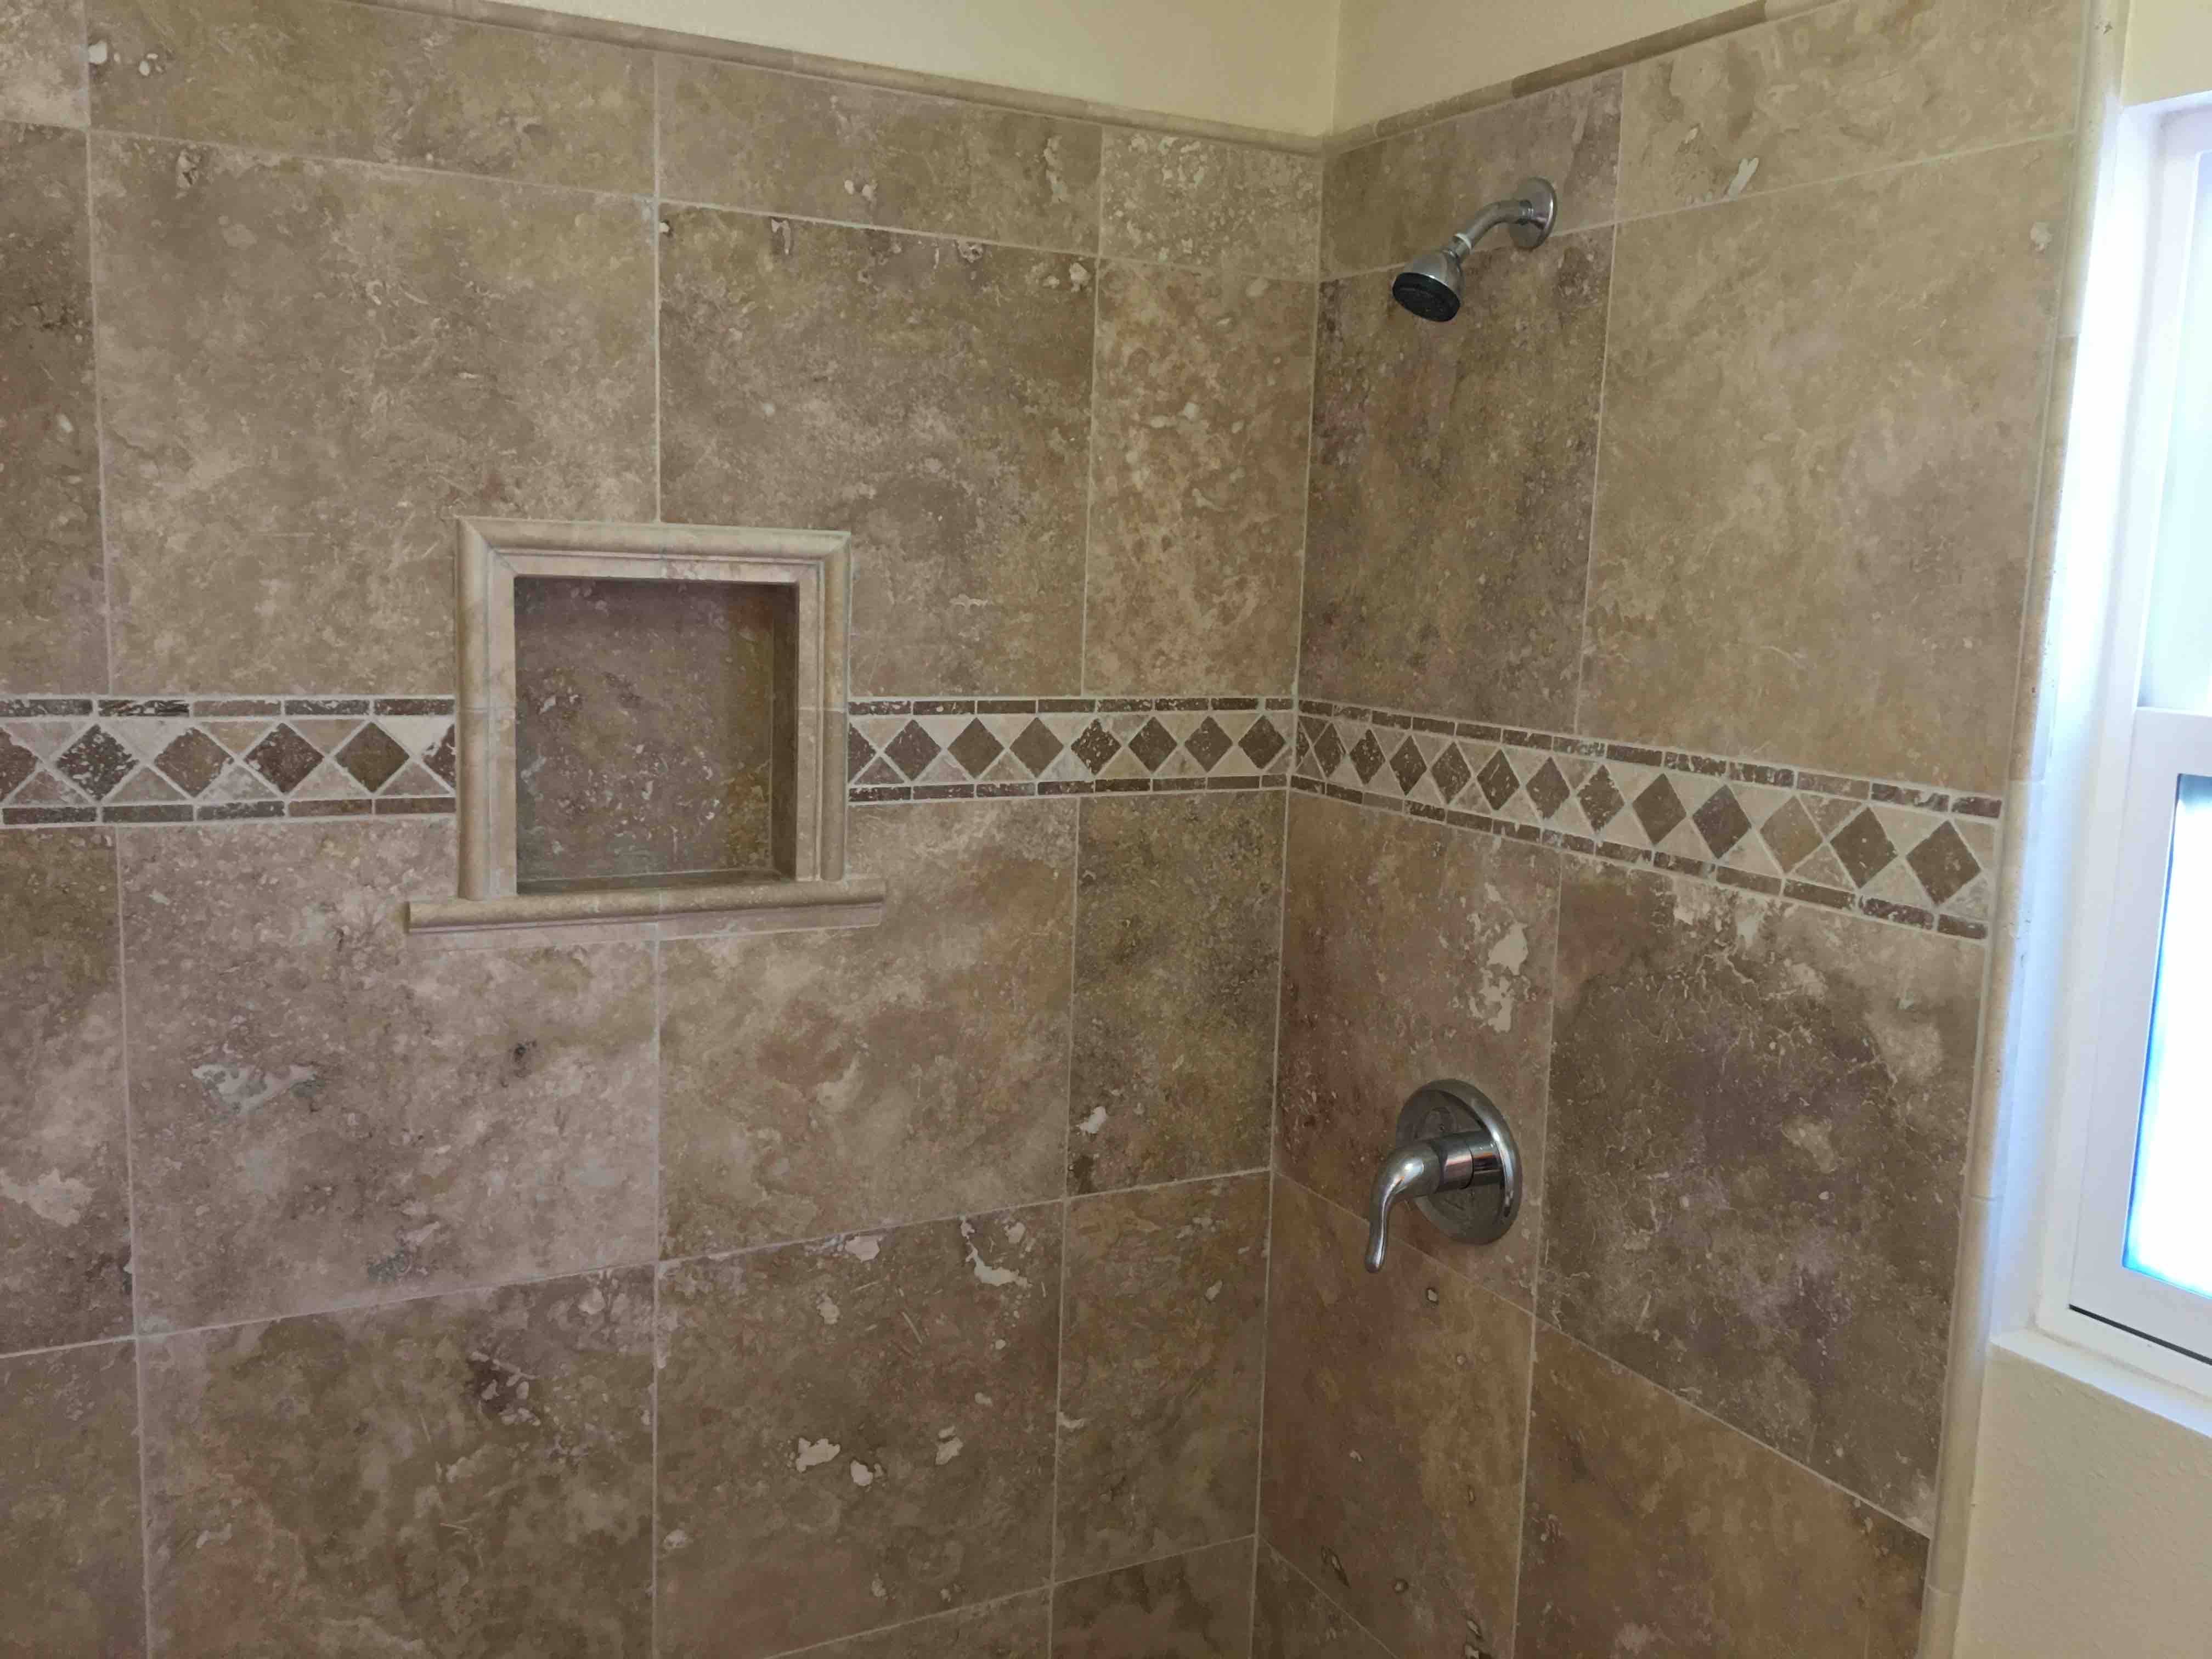 3 Travertine Tile Bathroom Shower with Nitch